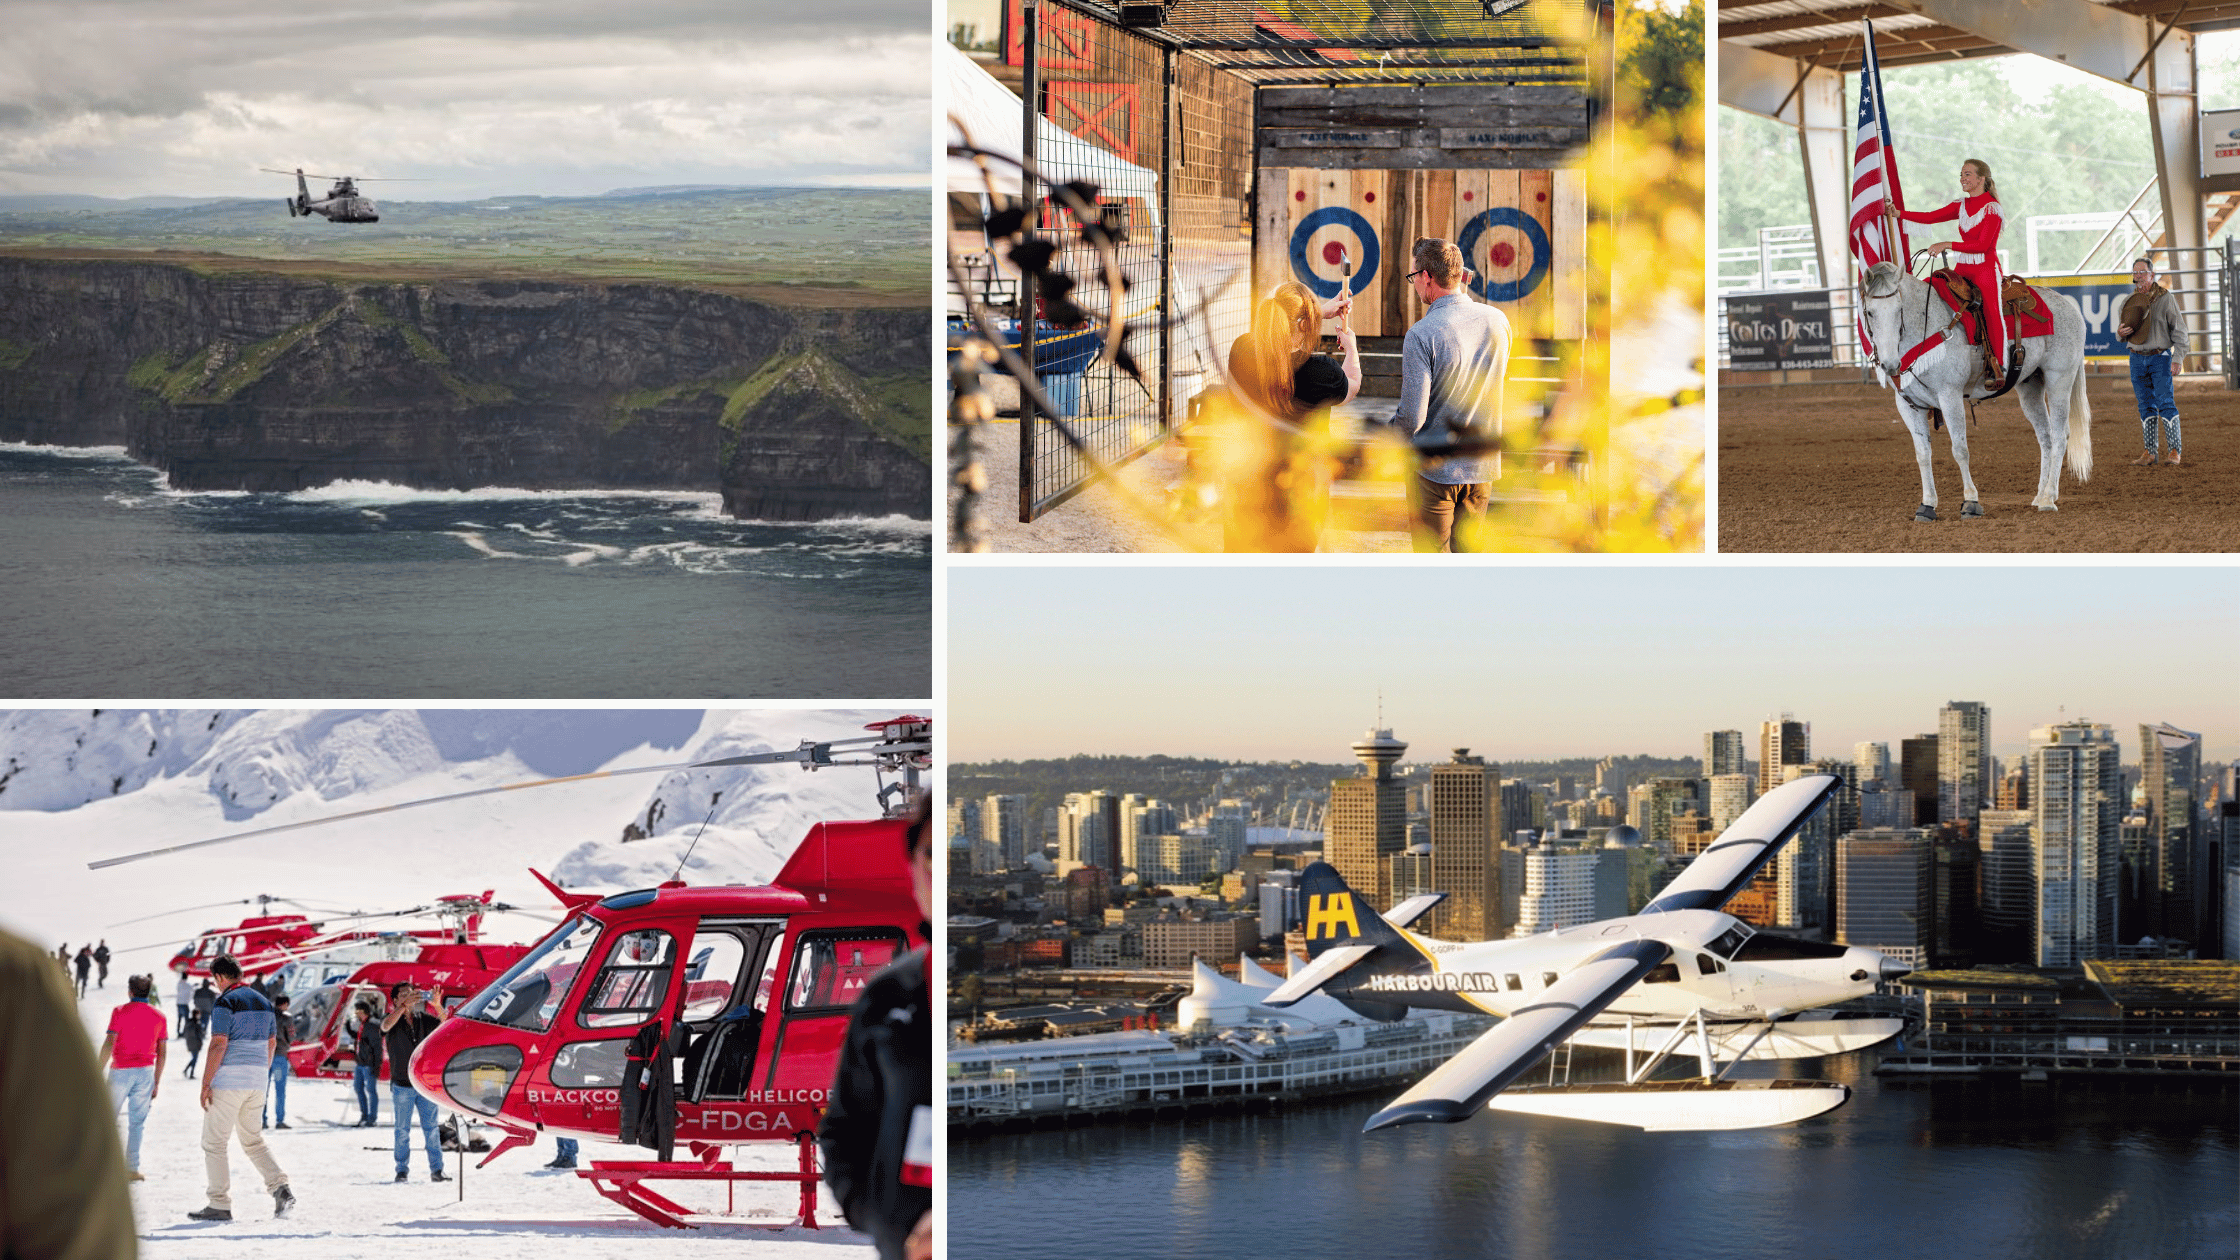 Hosts Global | Aviation and Patriotic Experiences such as helicopter tours, float planes, and axe throwing